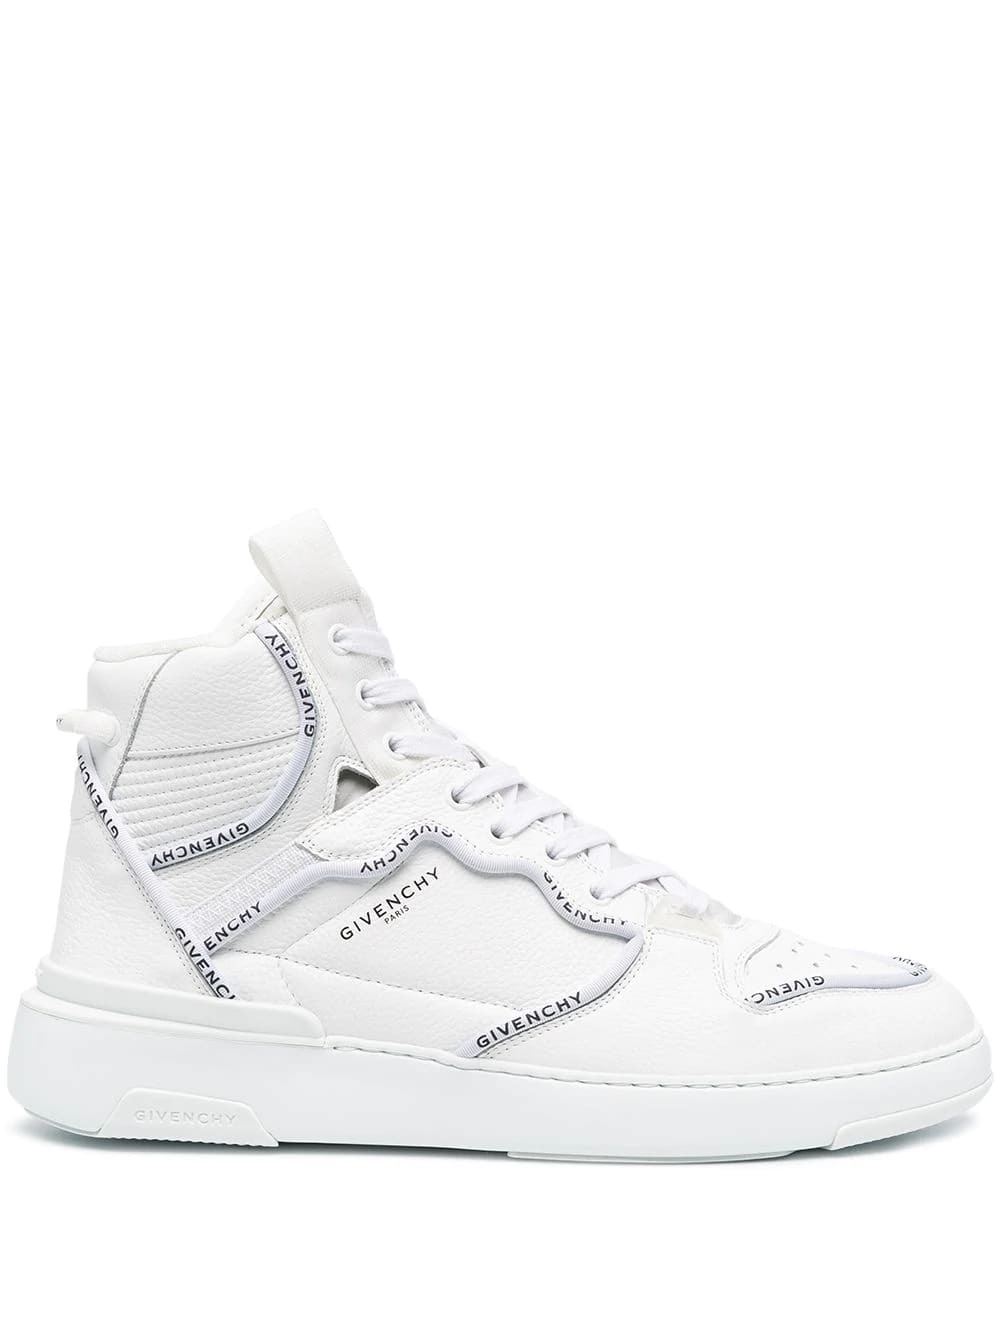 Givenchy Man White Wing High Sneakers With Profiles